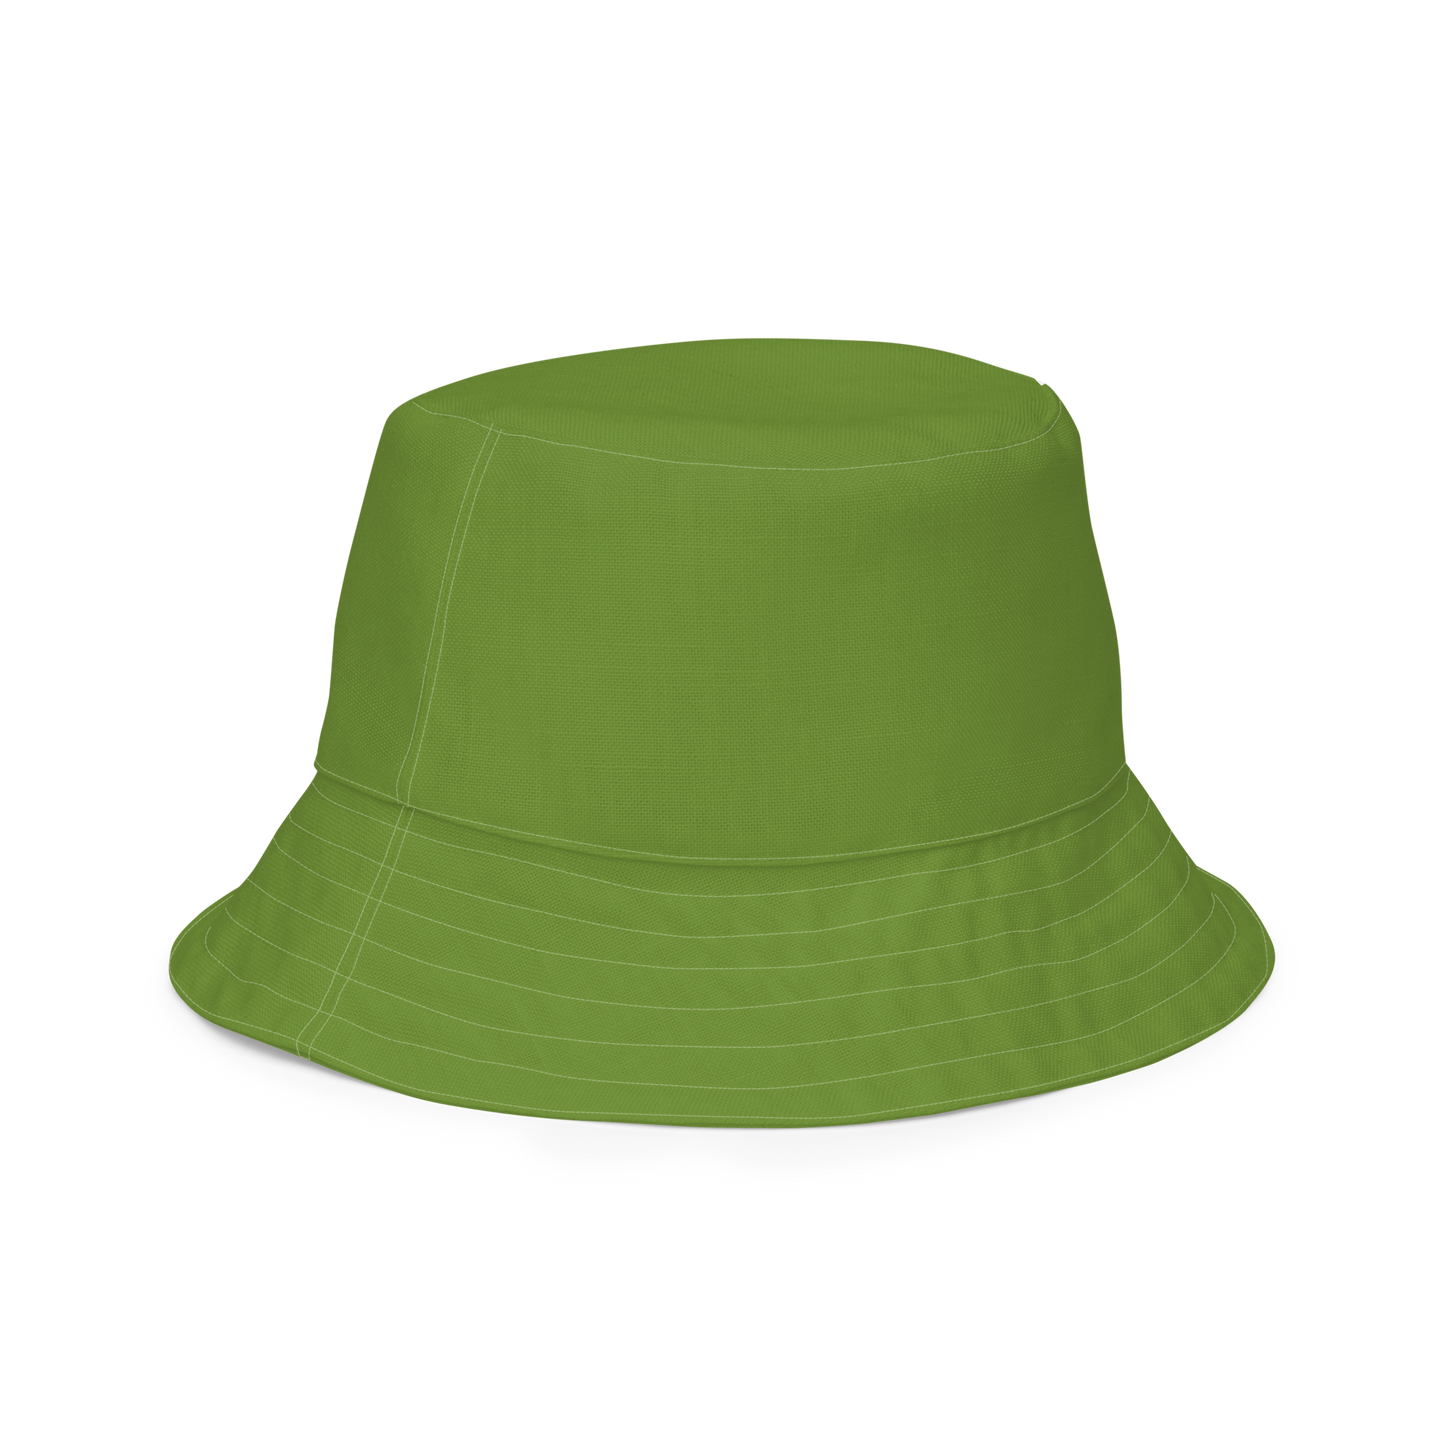 The FLOWER LOVE Collection - "Butterfly on a Bloom" Design Premium Reversible Bucket Hat - Green Inside - Beach Hat, Gifts for Her